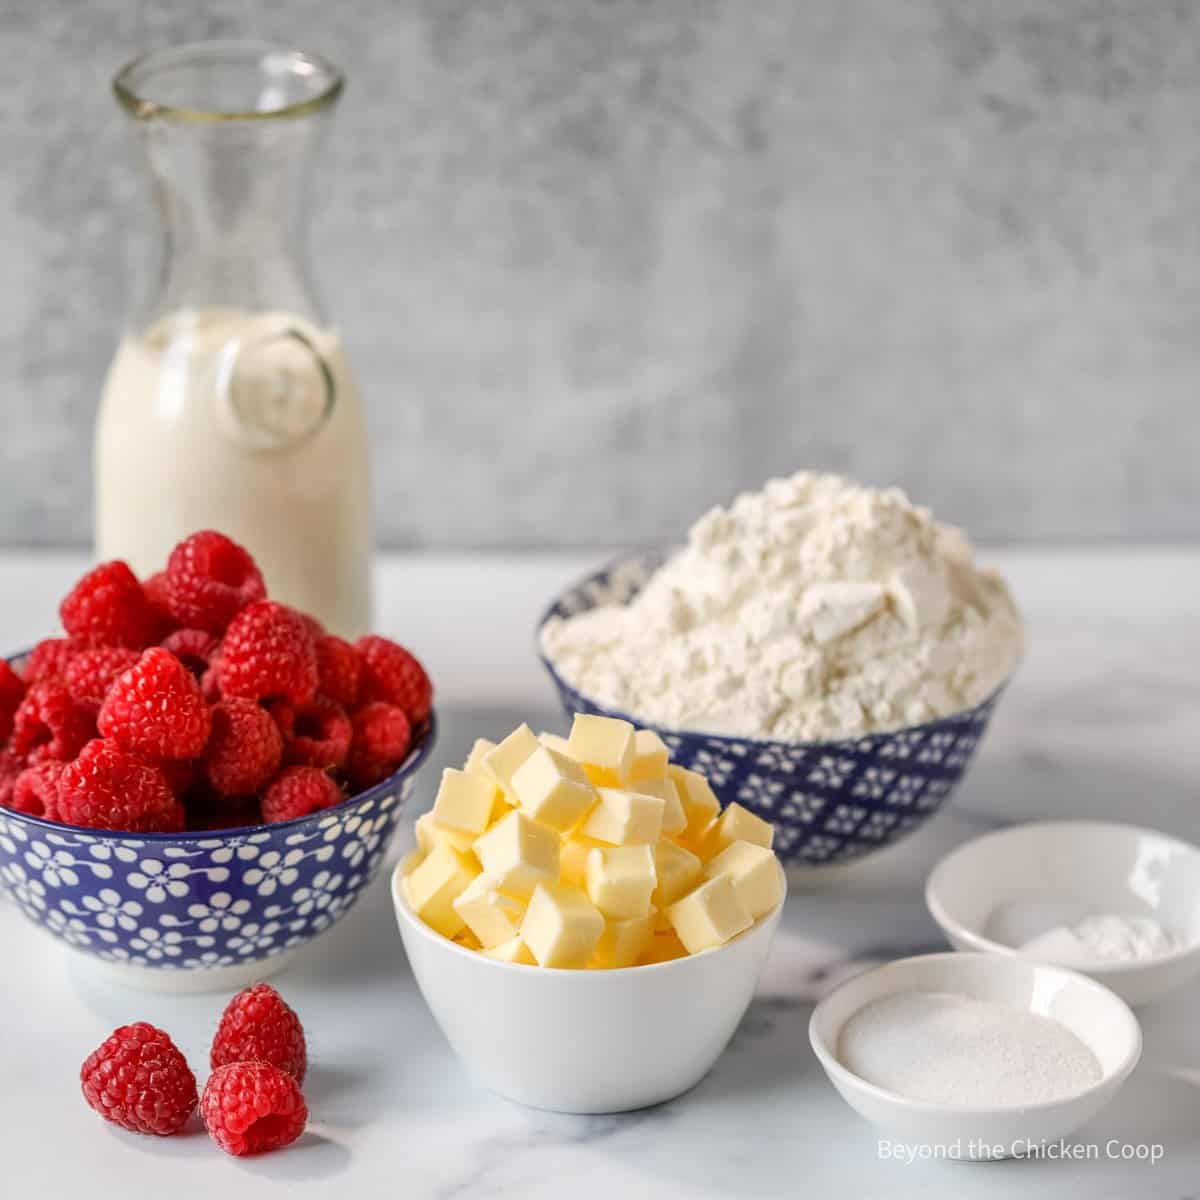 Ingredients for making raspberry shortcakes.